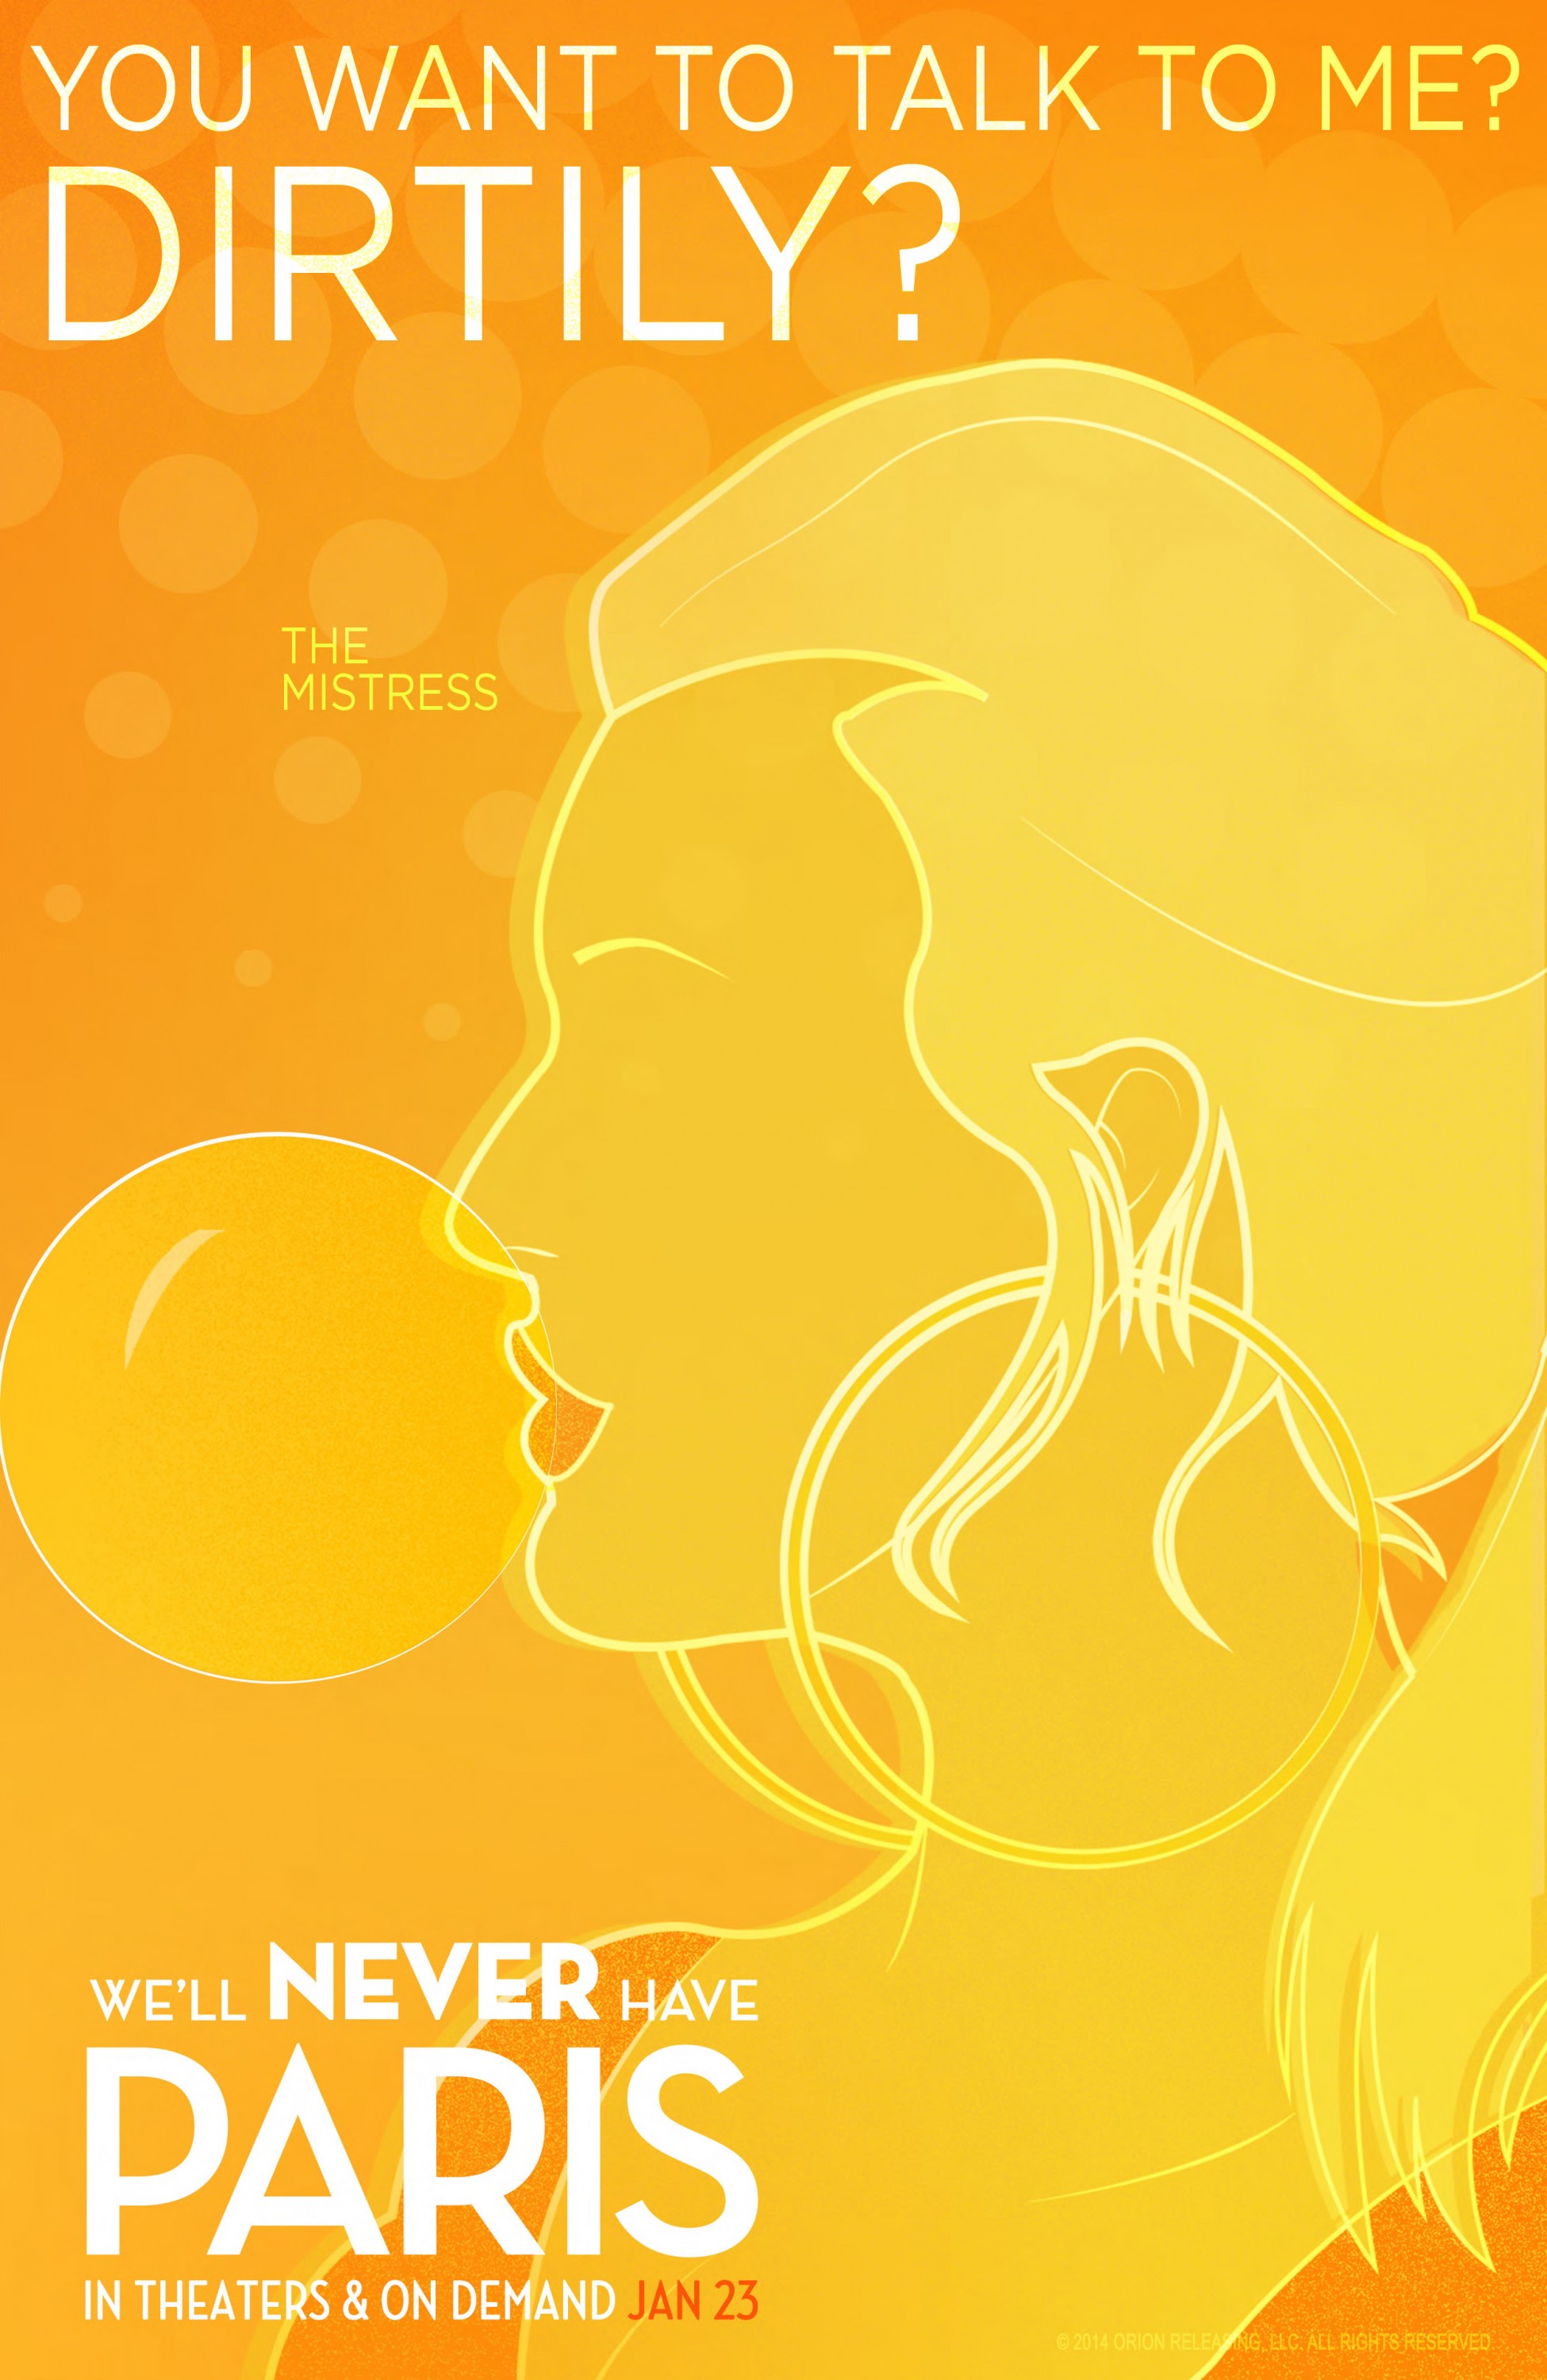 WE'LL NEVER HAVE PARIS-POSTER-06JANEIRO2015